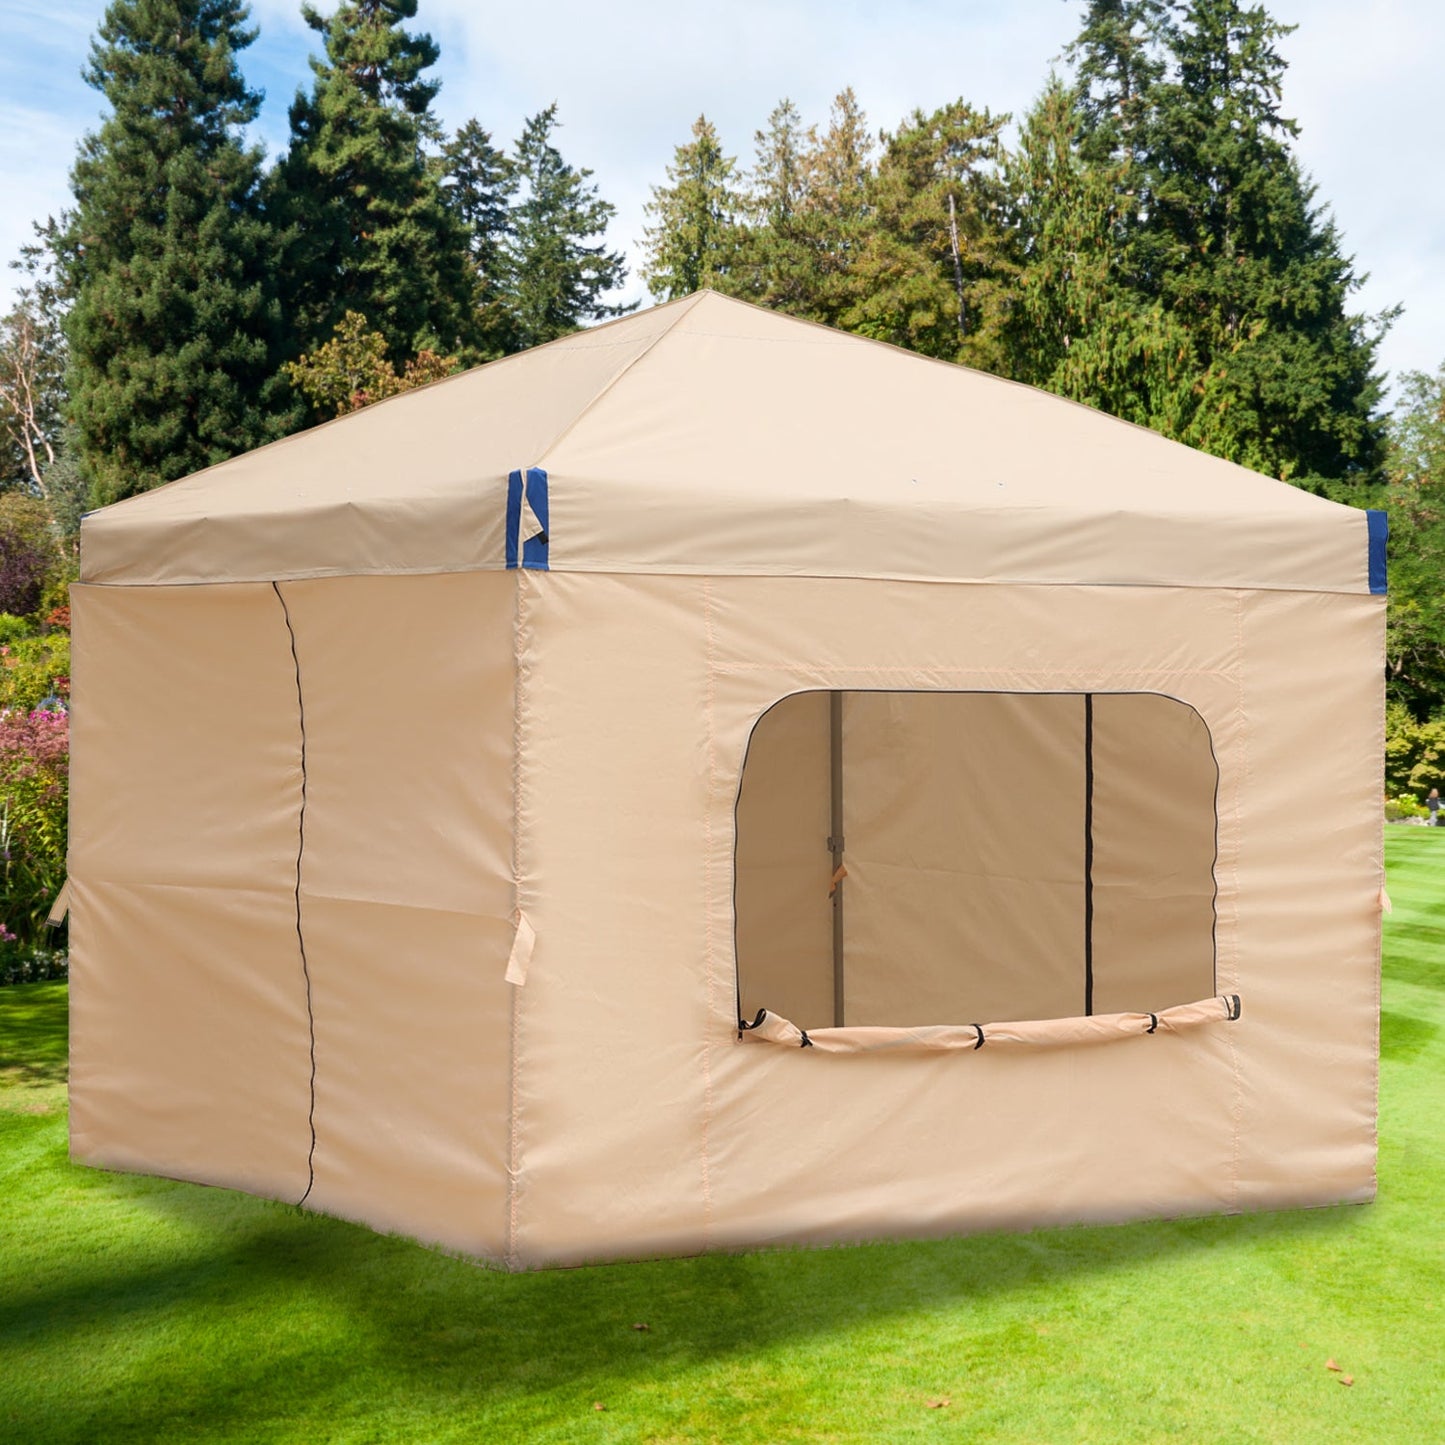 Canopy Sidewall Replacement with 2 Side Zipper and Windows for 10'' x 10'' Pop Up Canopy Tent  (Sidewall Only) Gazebo part Aoodor LLC   